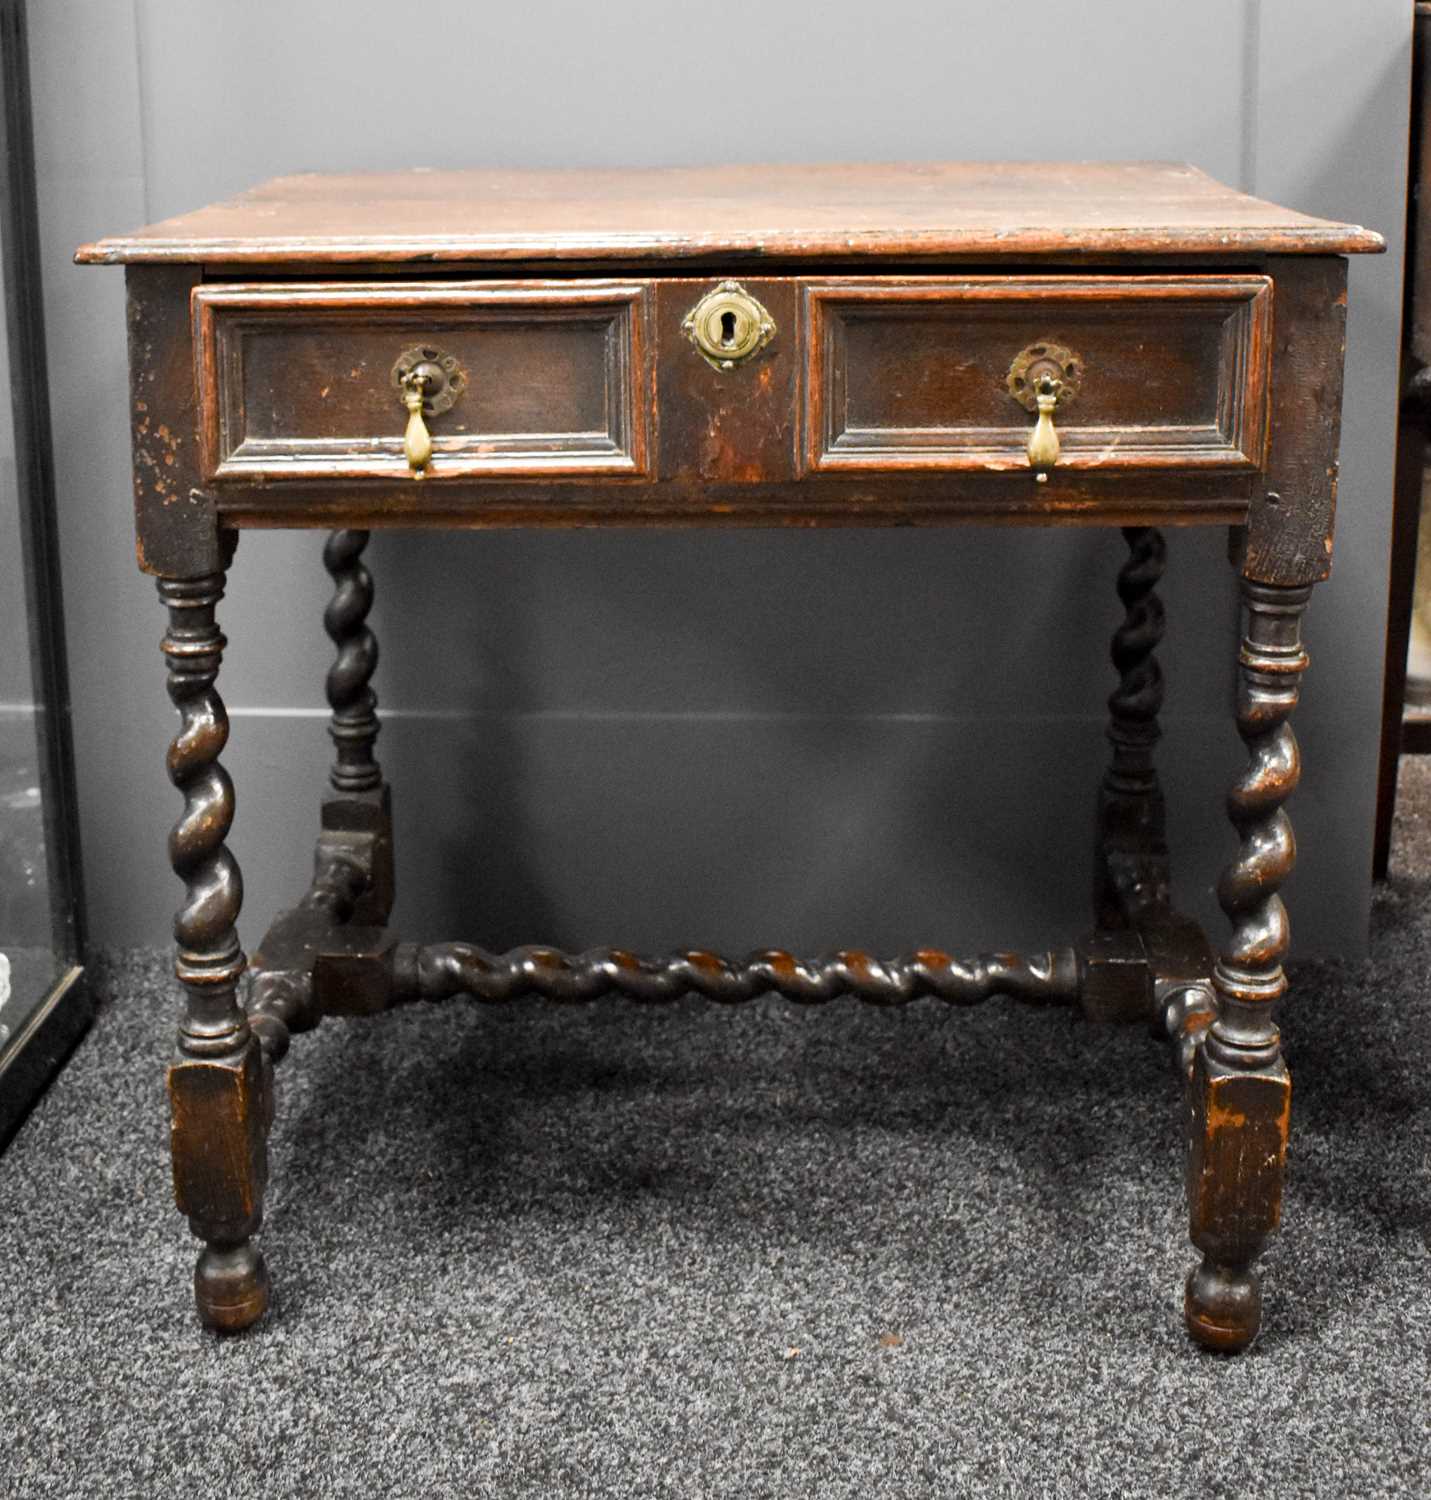 A 17th century oak side table with single drawer, barley twist legs and H form stretcher, top